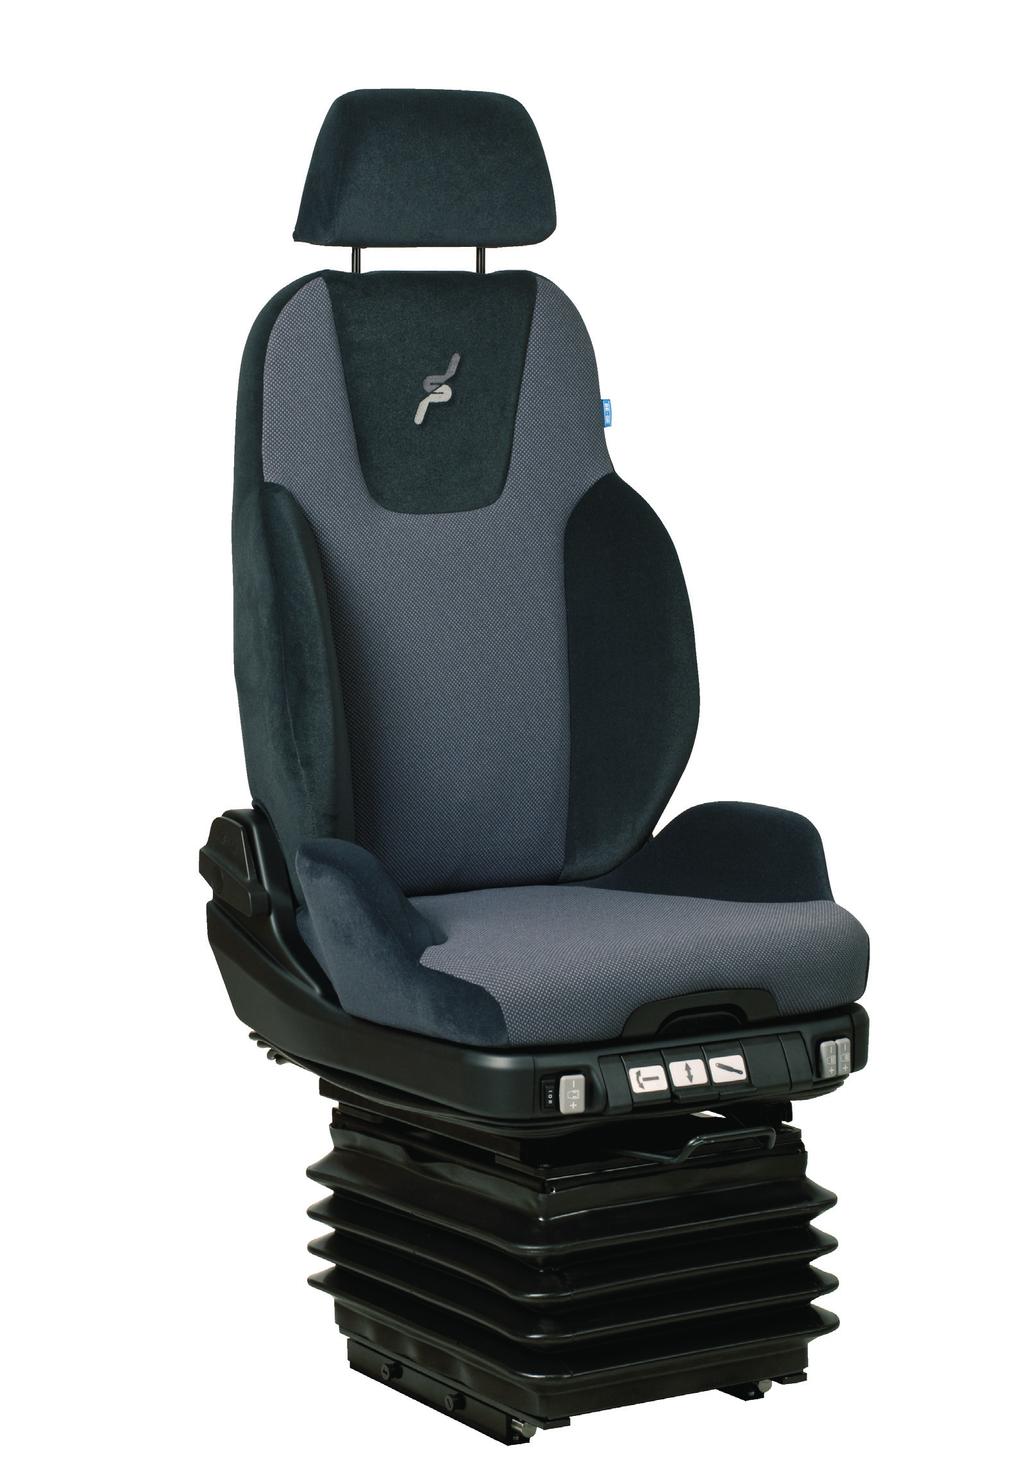 Be-Ge 39 series The seat pictured contains optional features.